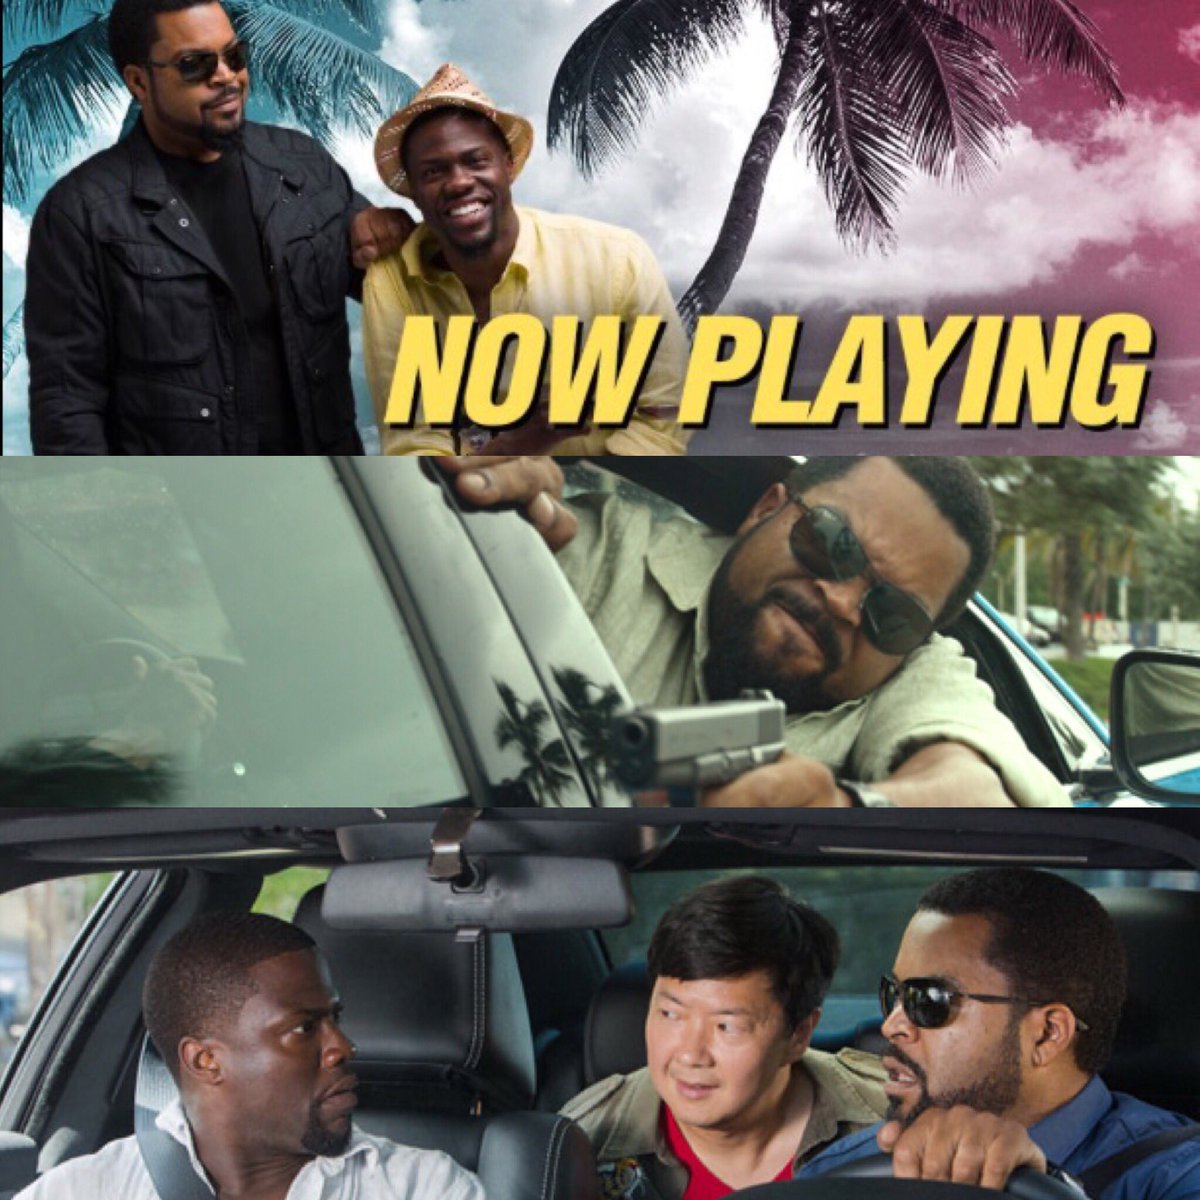 ????????Wake up Australia! Today is the day we ride...#RideAlong2 in theaters!!! https://t.co/eAympA3ZV0